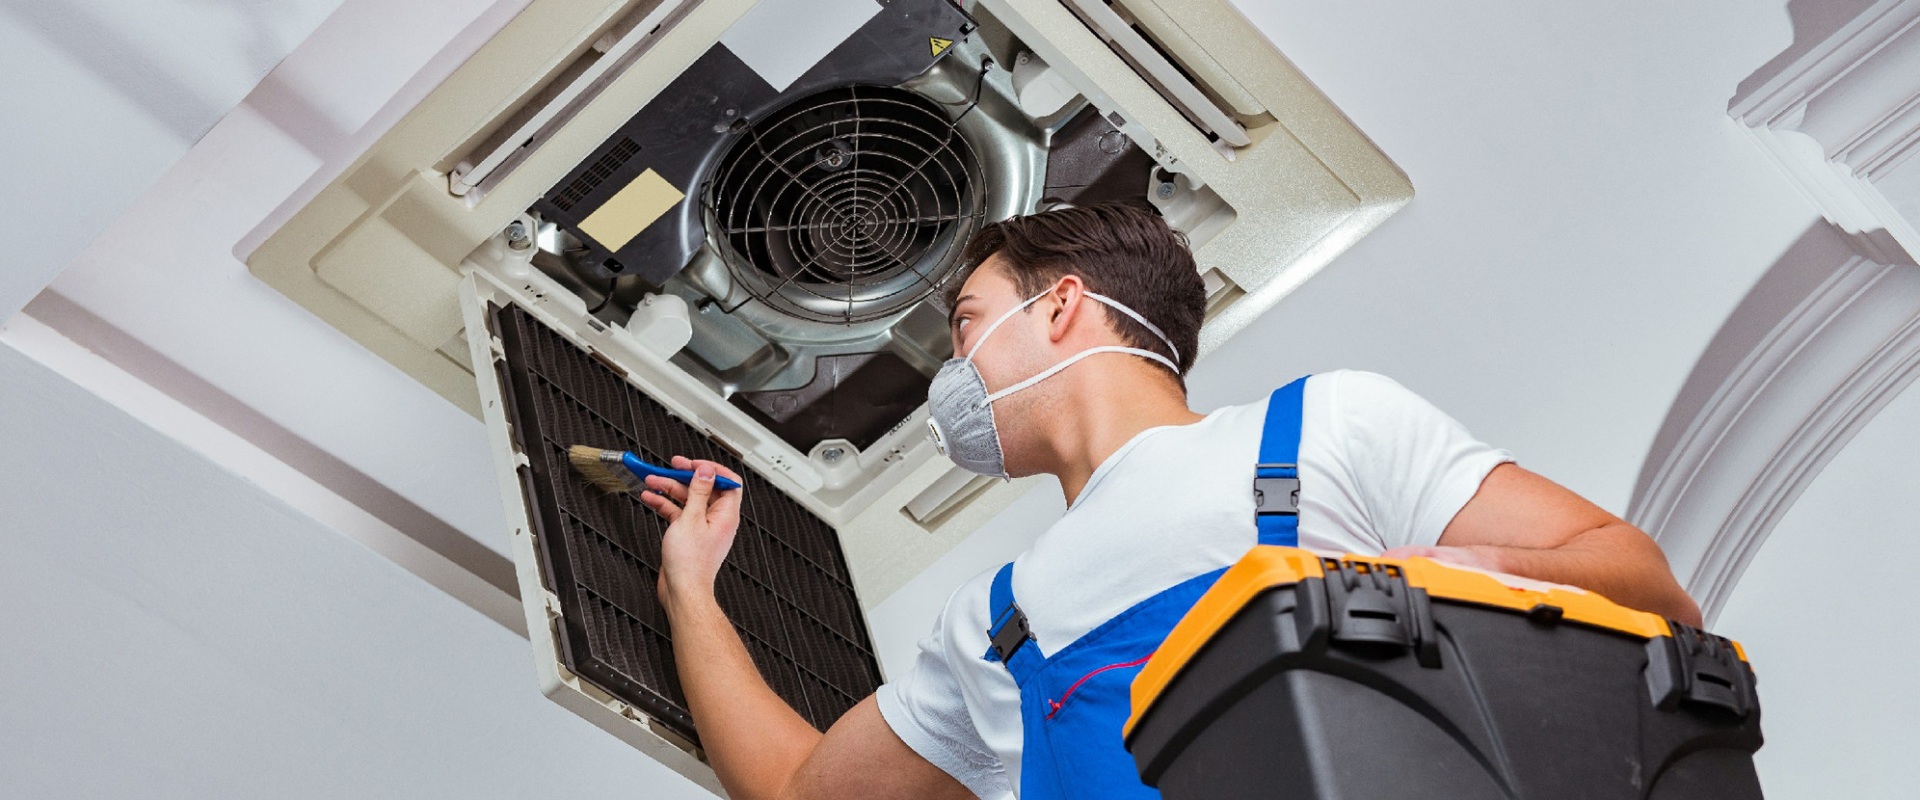 Air Filtration Systems for Replacement in Miami-Dade County, FL